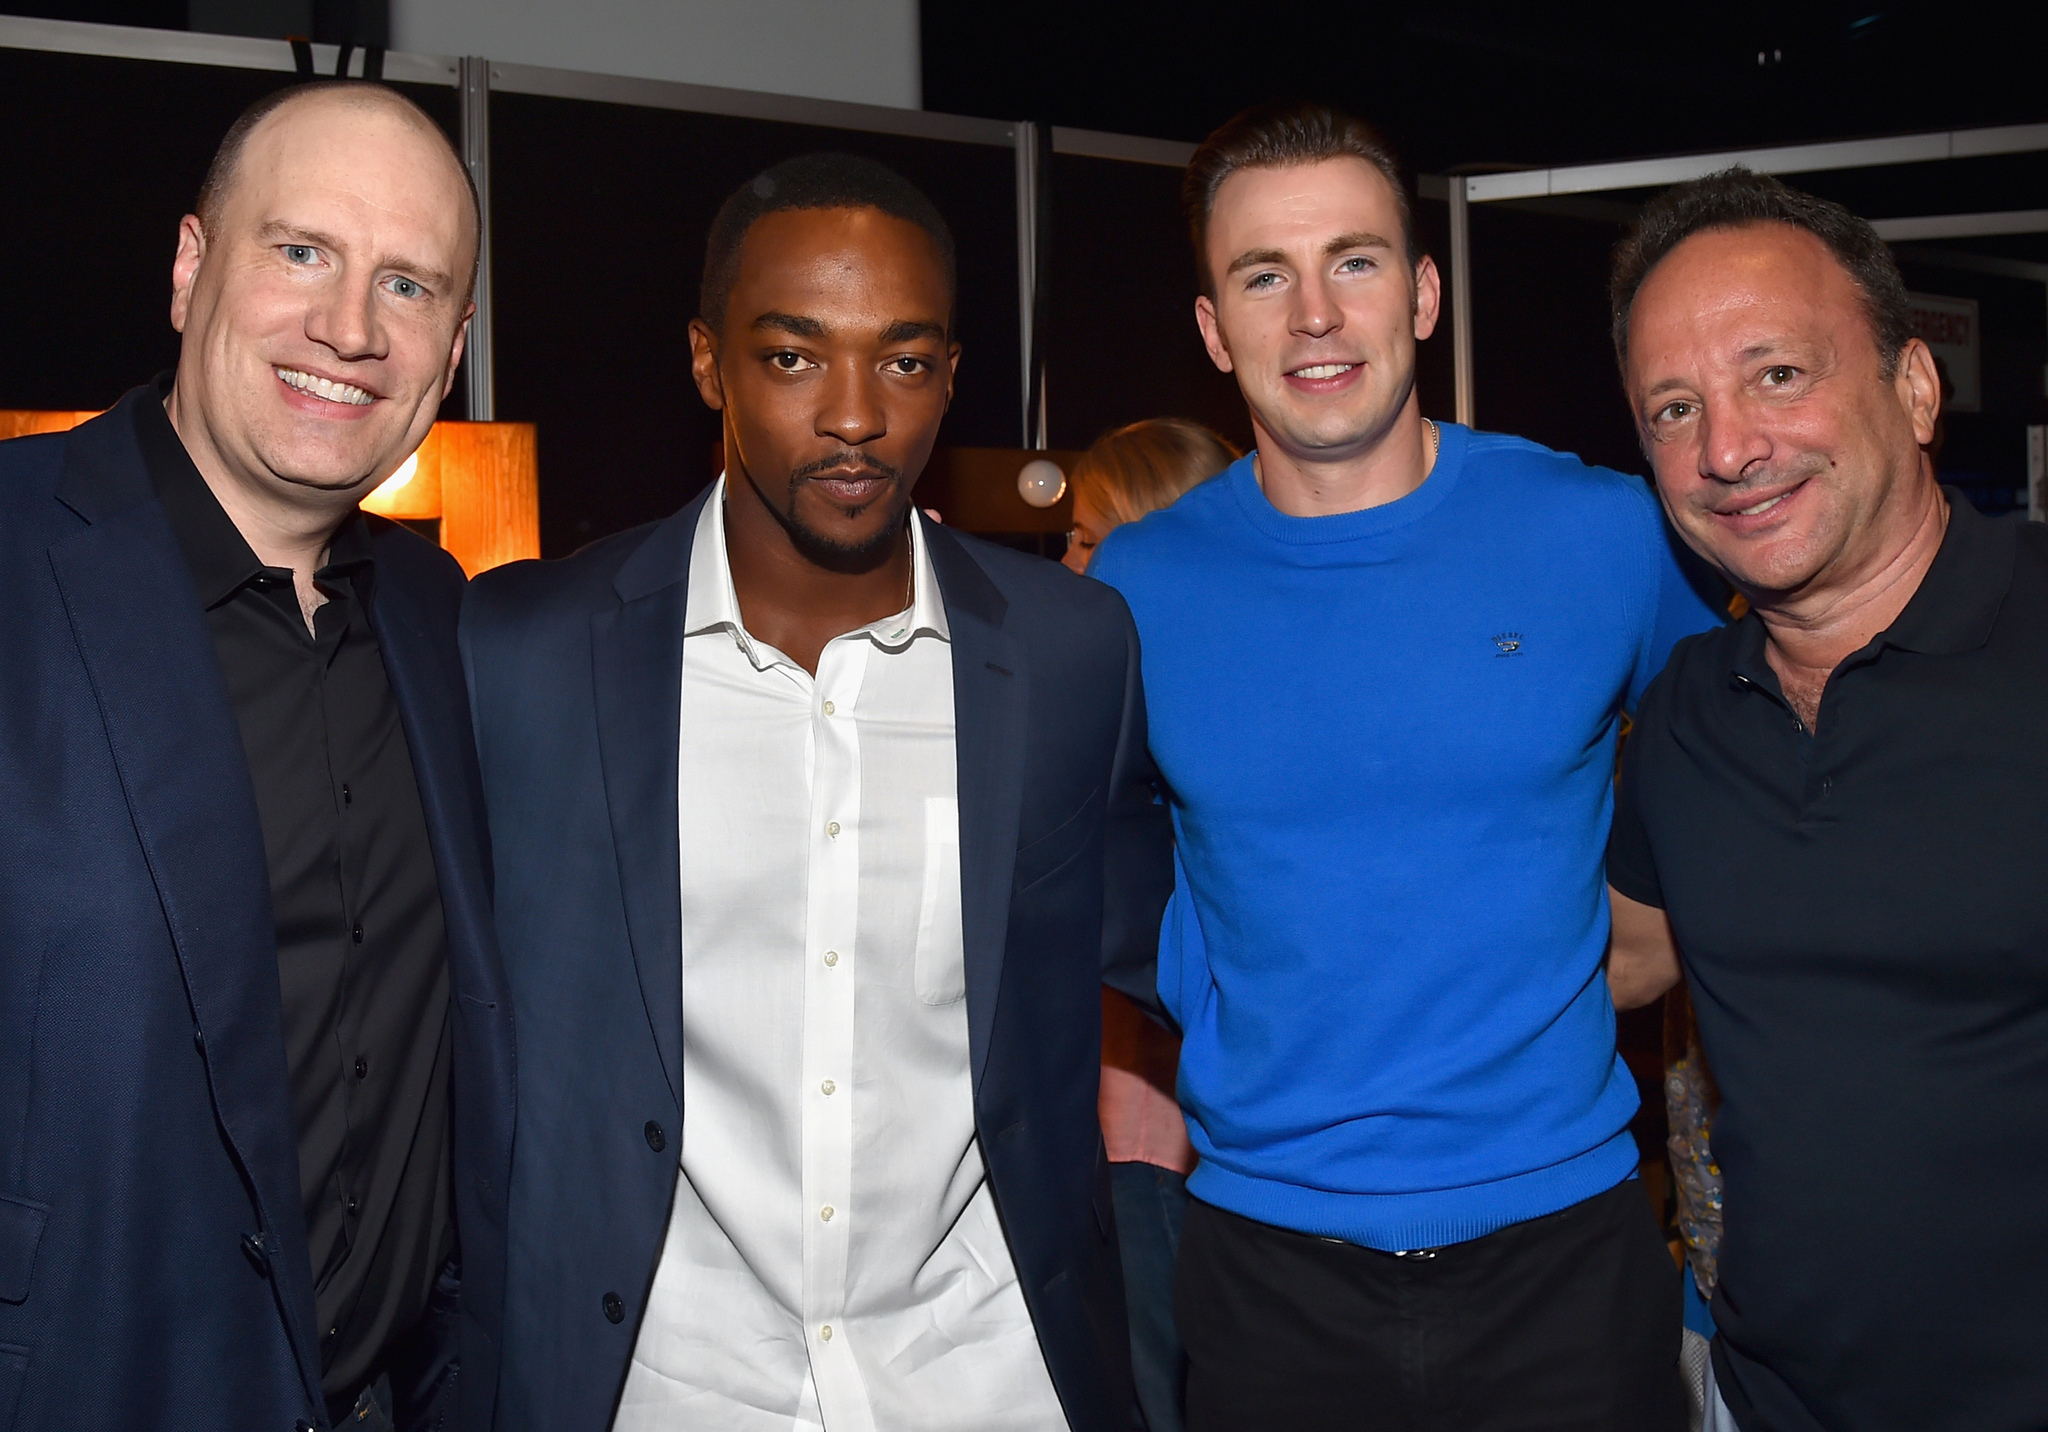 Louis D'Esposito, Chris Evans, Kevin Feige and Anthony Mackie